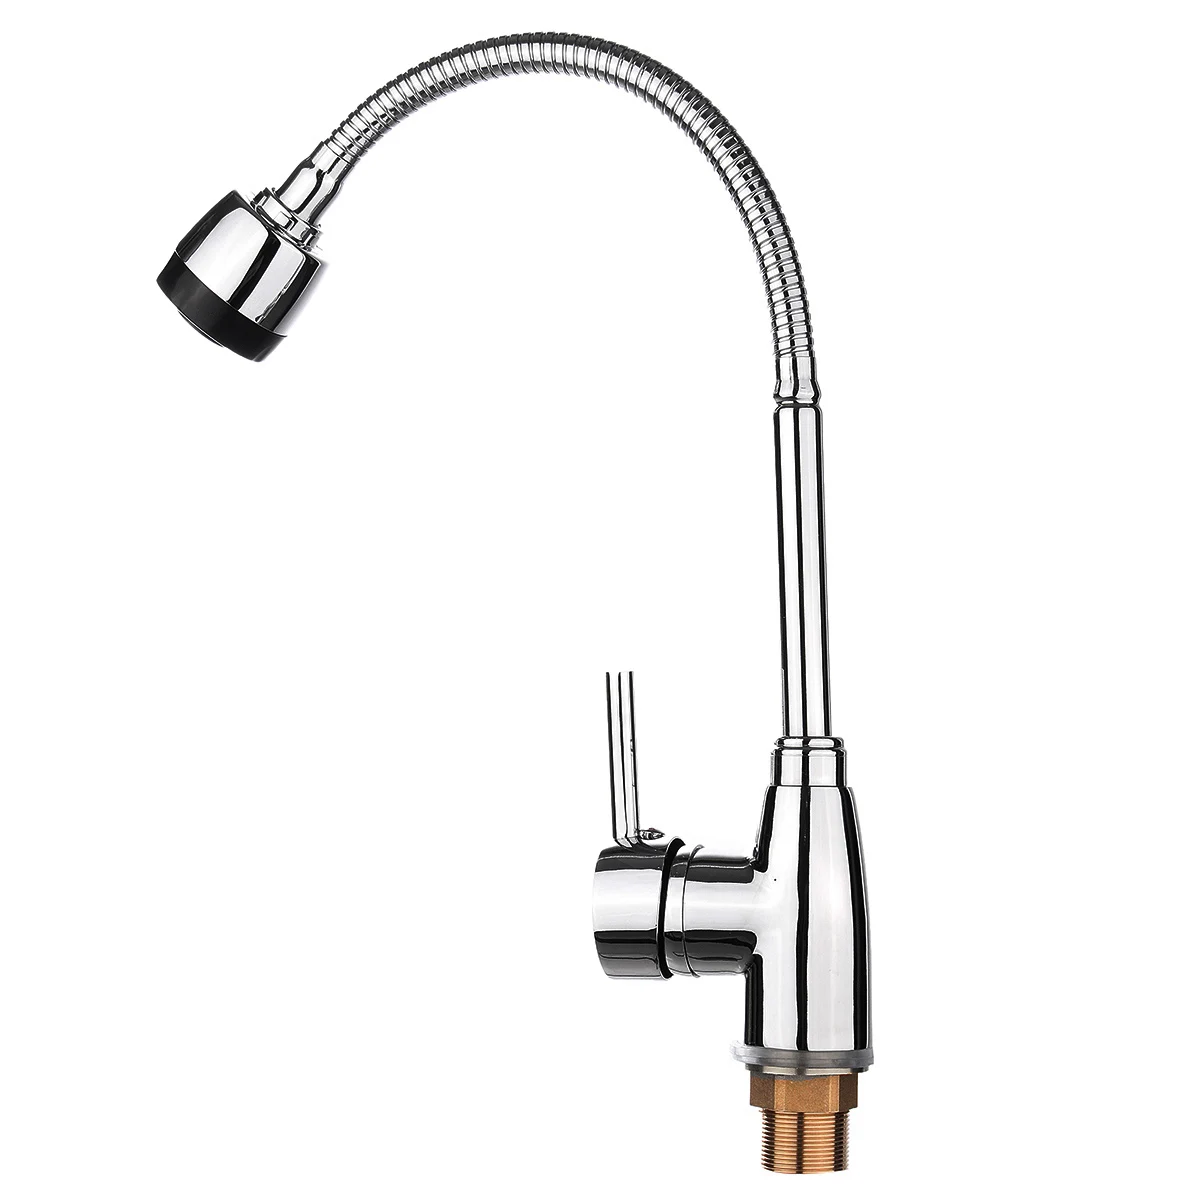 360Rotatable Pull Out Kitchen Spray Basin Faucet Mixer Tap Spout Single Handle Sink Adjustable Spout Deck Mounted Solid Brass